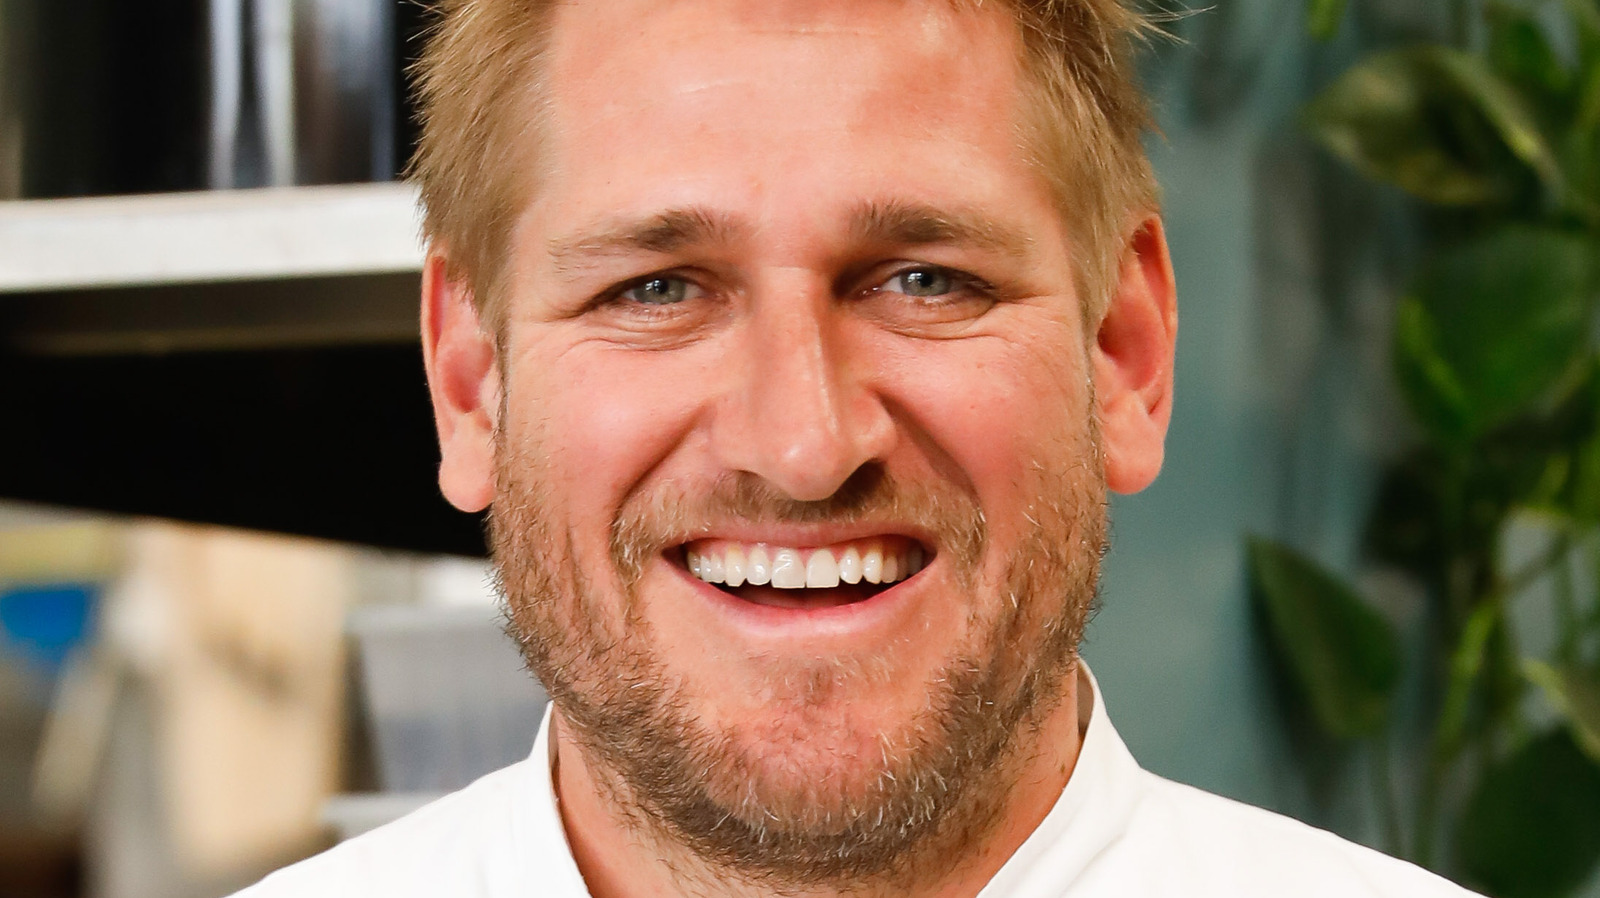 https://www.mashed.com/img/gallery/this-is-what-chef-curtis-stone-typically-eats-in-a-day-exclusive/l-intro-1623784295.jpg